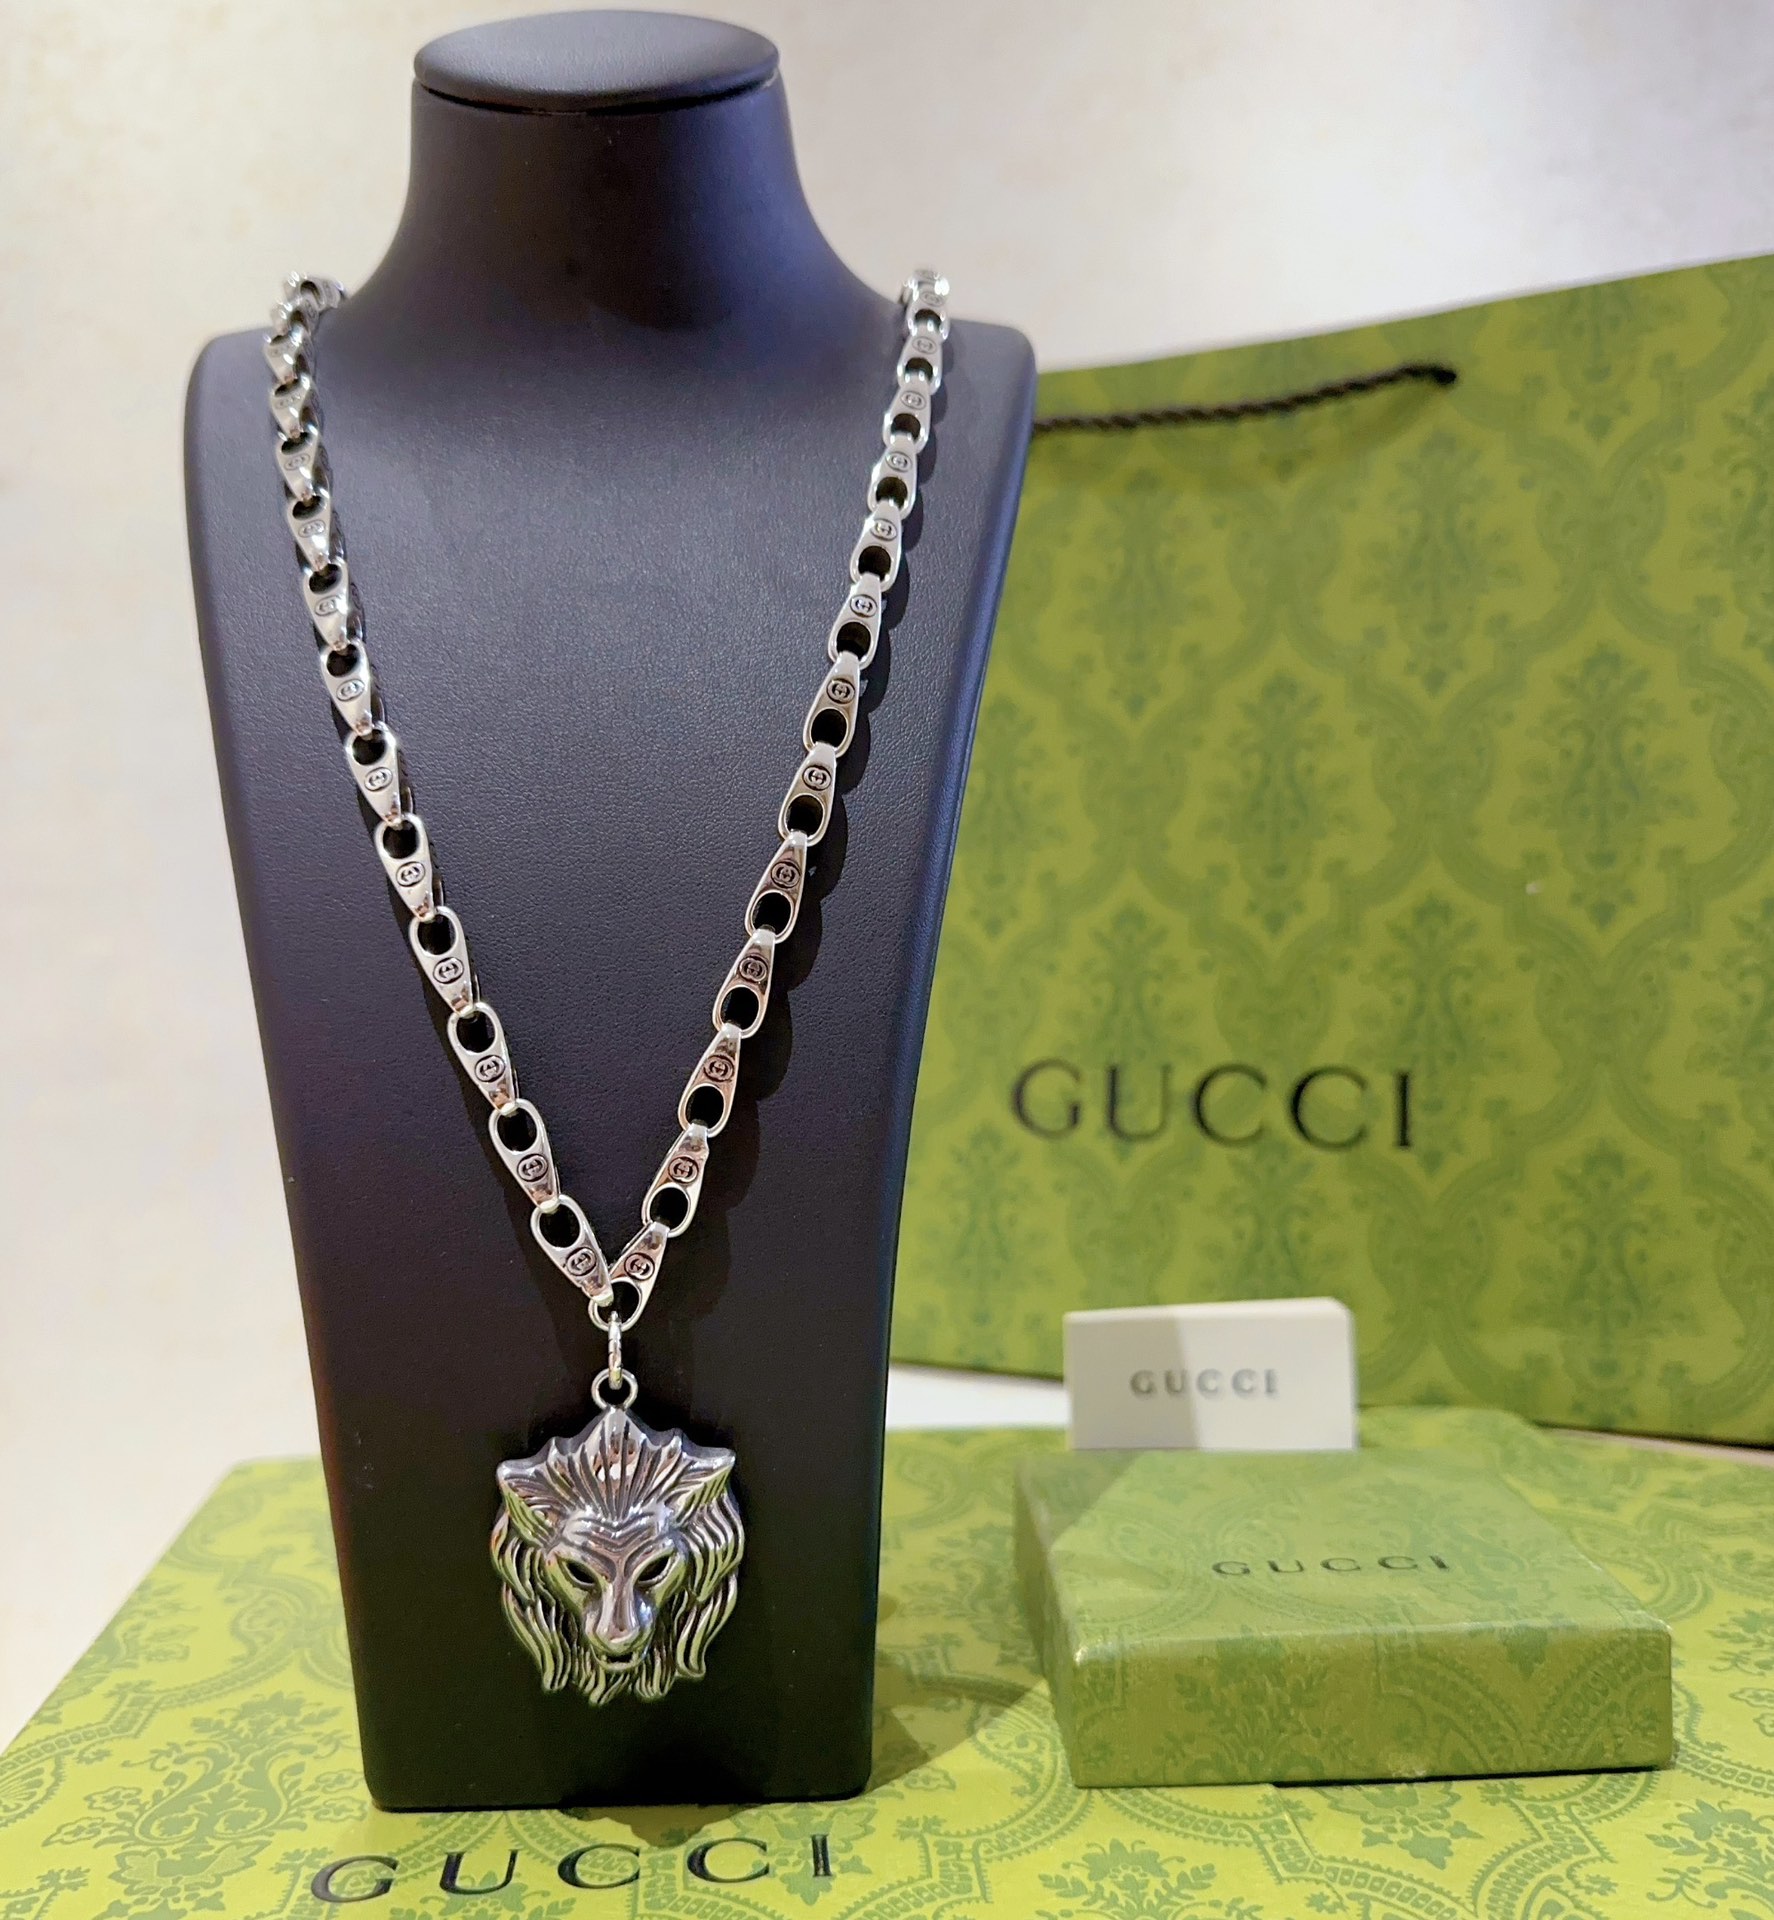 Gucci Jewelry Necklaces & Pendants Replica Online
 Chains